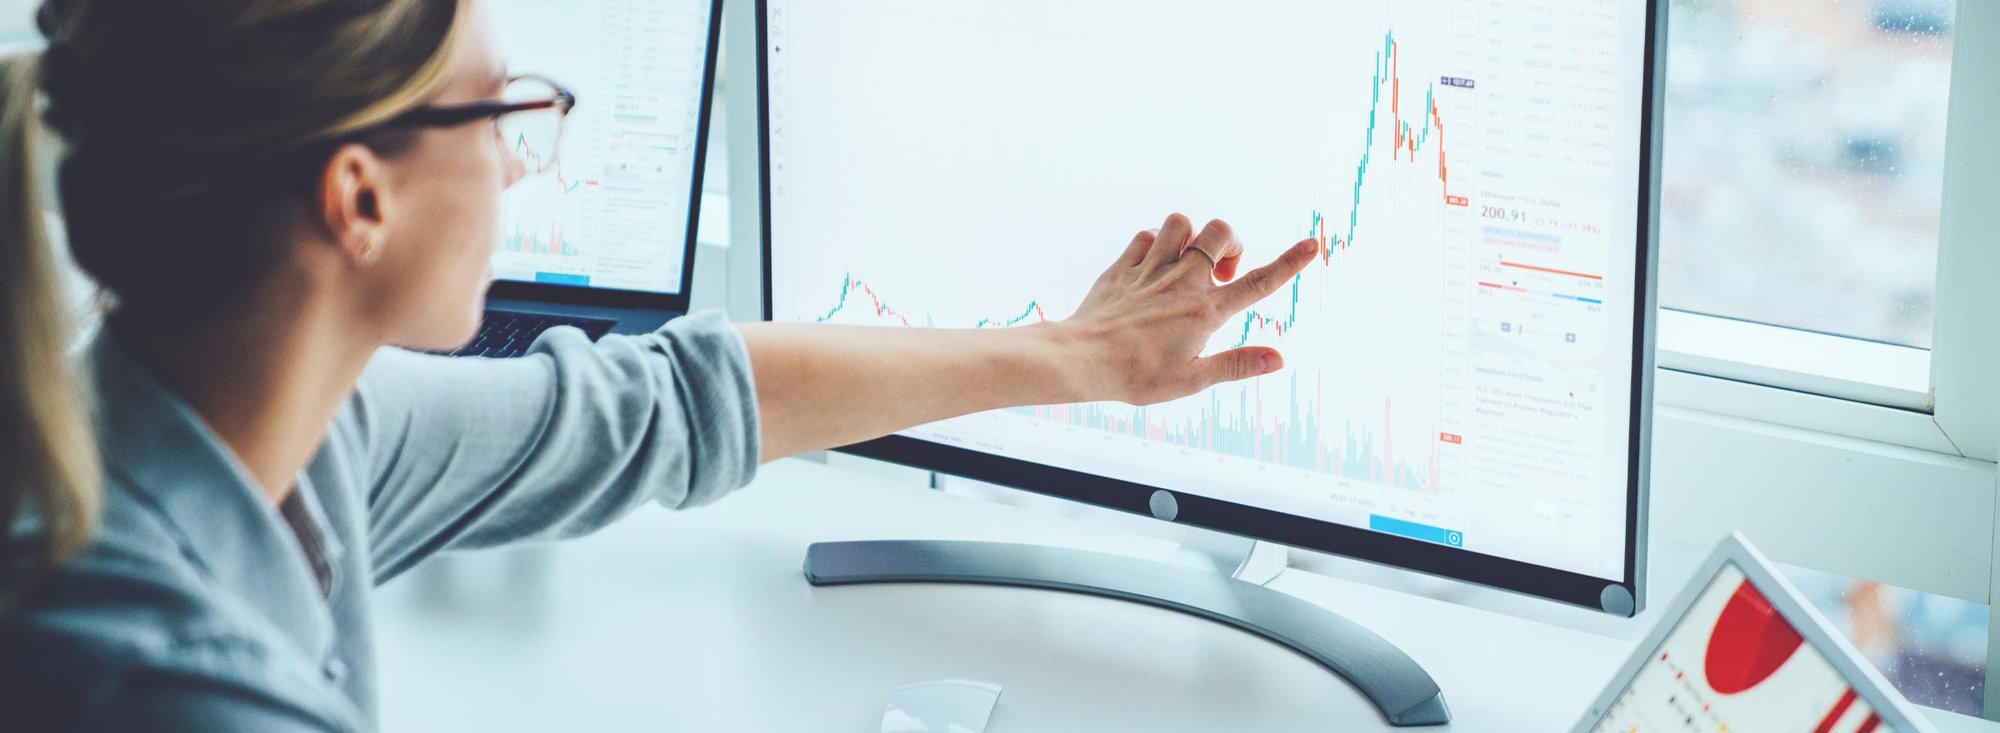 woman pointing to a graph on a monitor